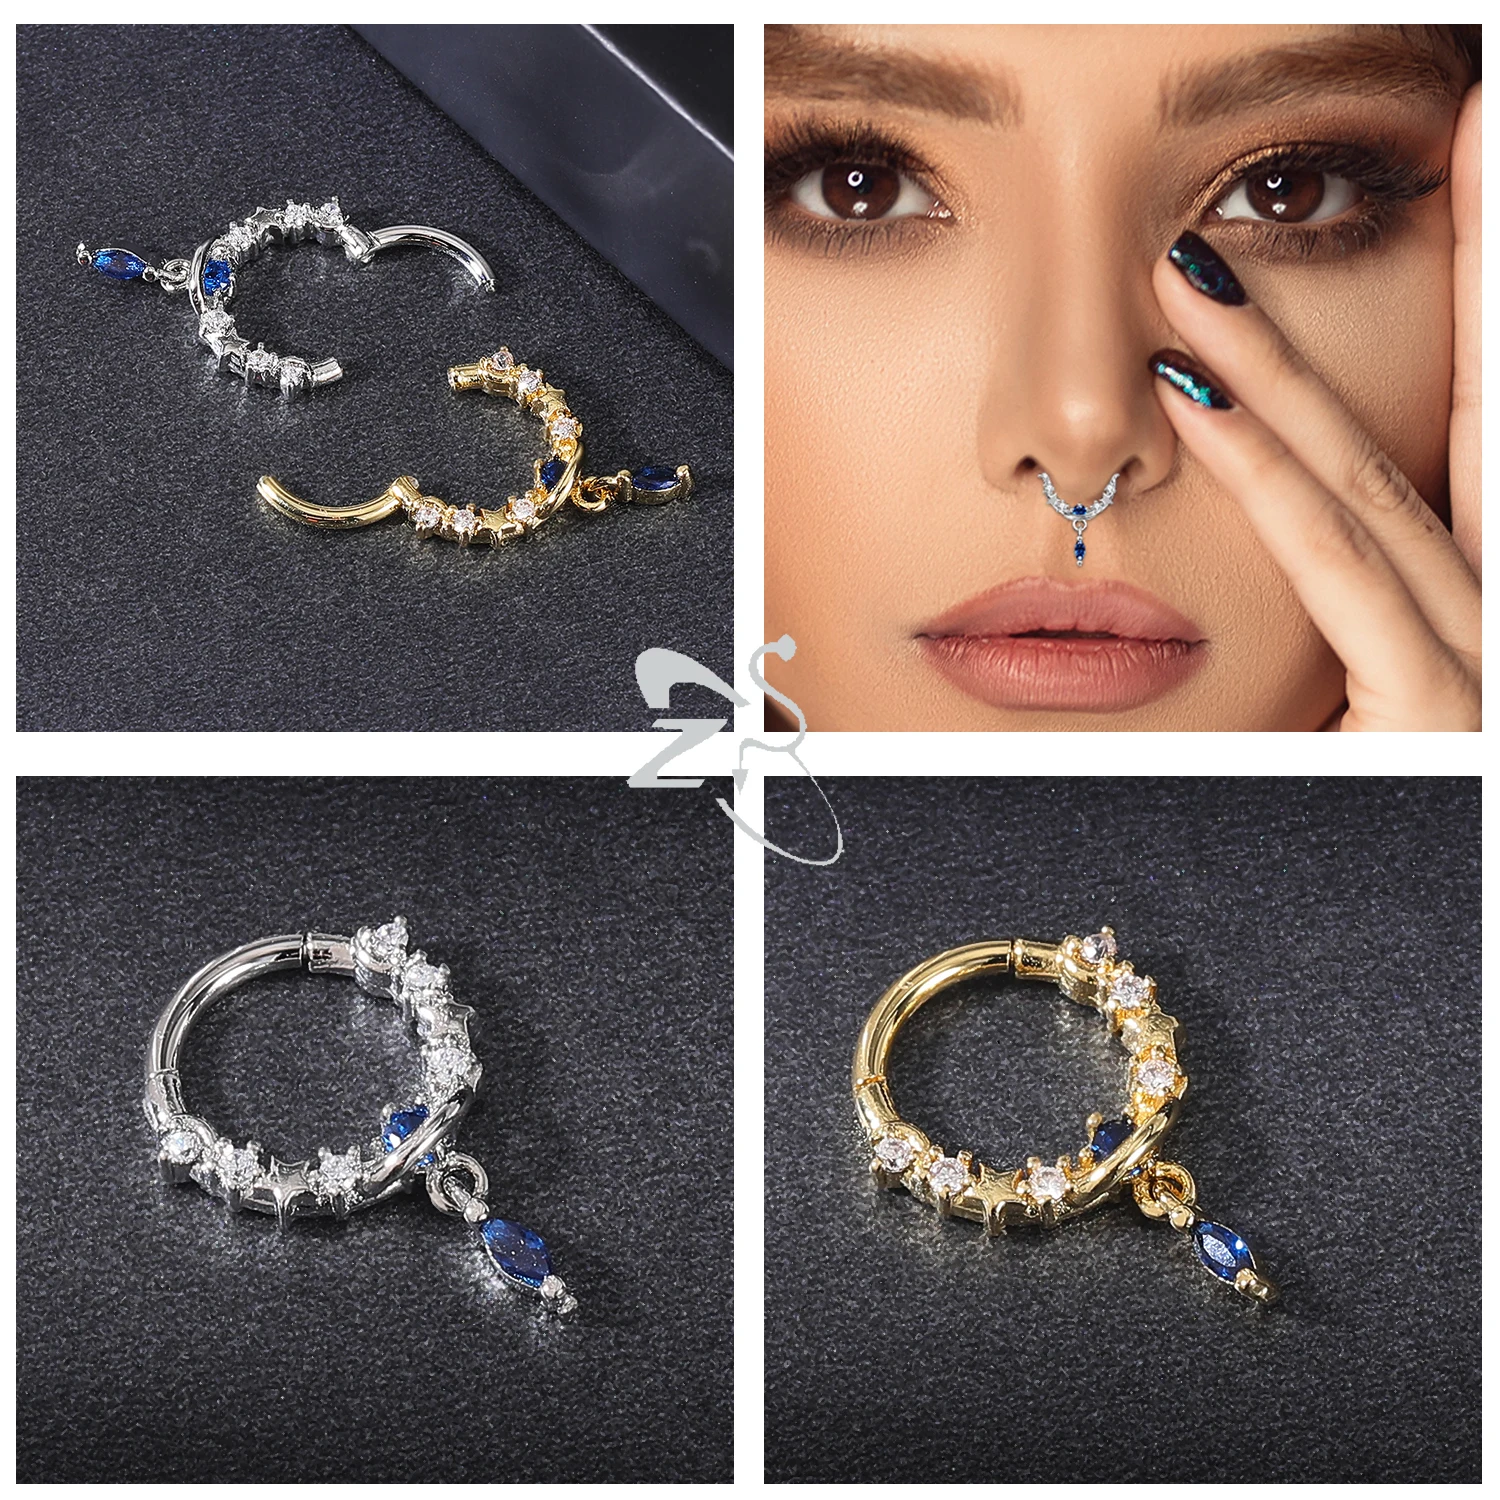 ZS 1PC 16G Star Moon Nose Piercings Gold Plated Dangle Nose Ring Stainless Steel Septum Clicker Zircon Helix Cartilage Piercing